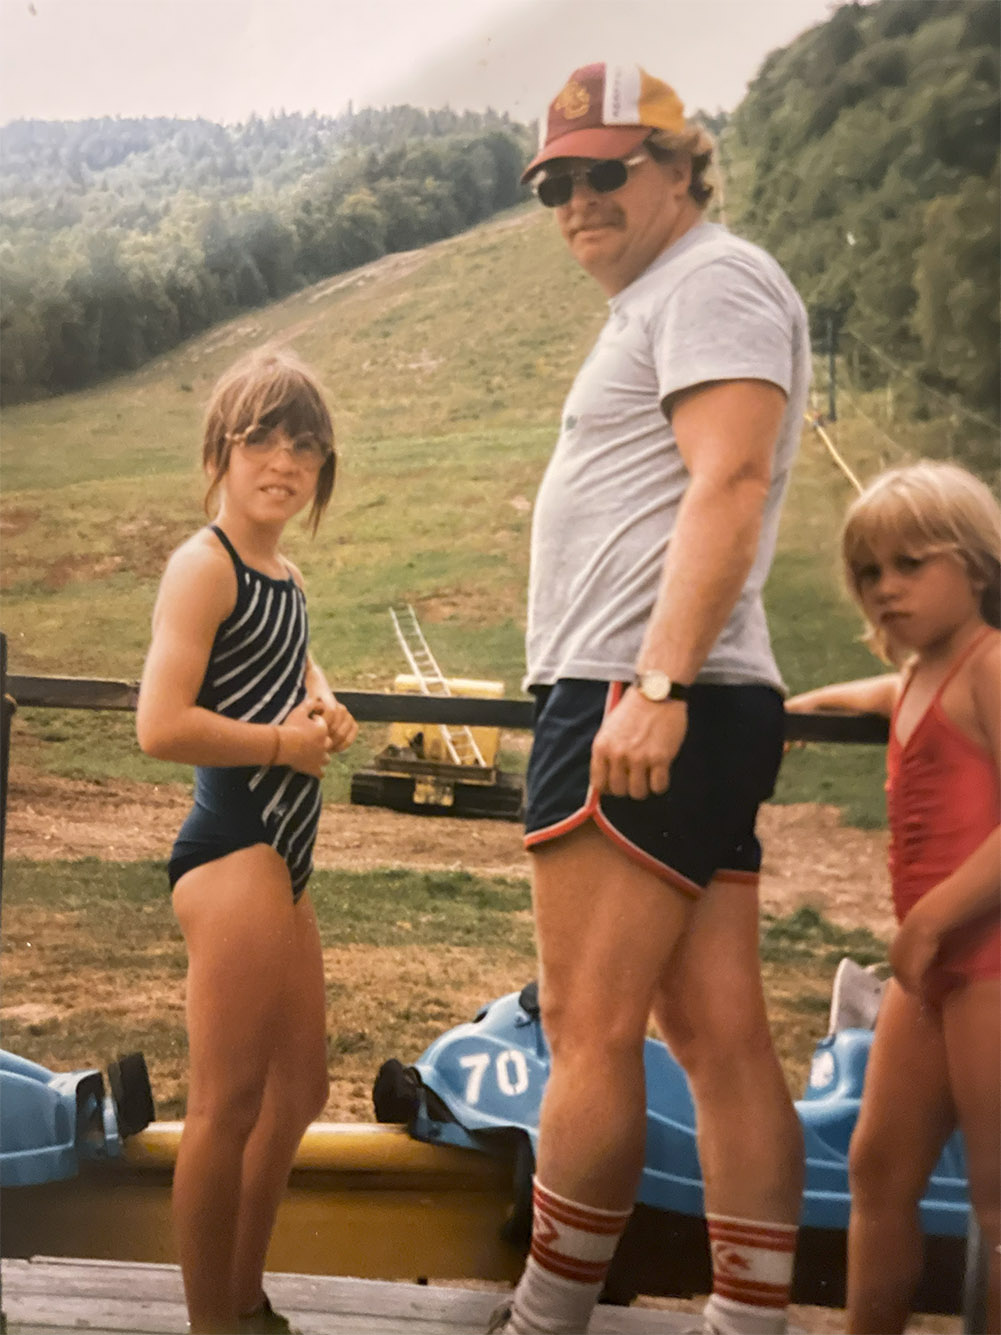 Photo: Older photo of a young Laurie Craigen (left) next to her father. A young child in a black and white full swimsuit stands and looks over her shoulder at the camera. To her right an older man wearing sunglasses, a hat, grey shirt, and black shirts, looks over his shoulder to the camera as well.